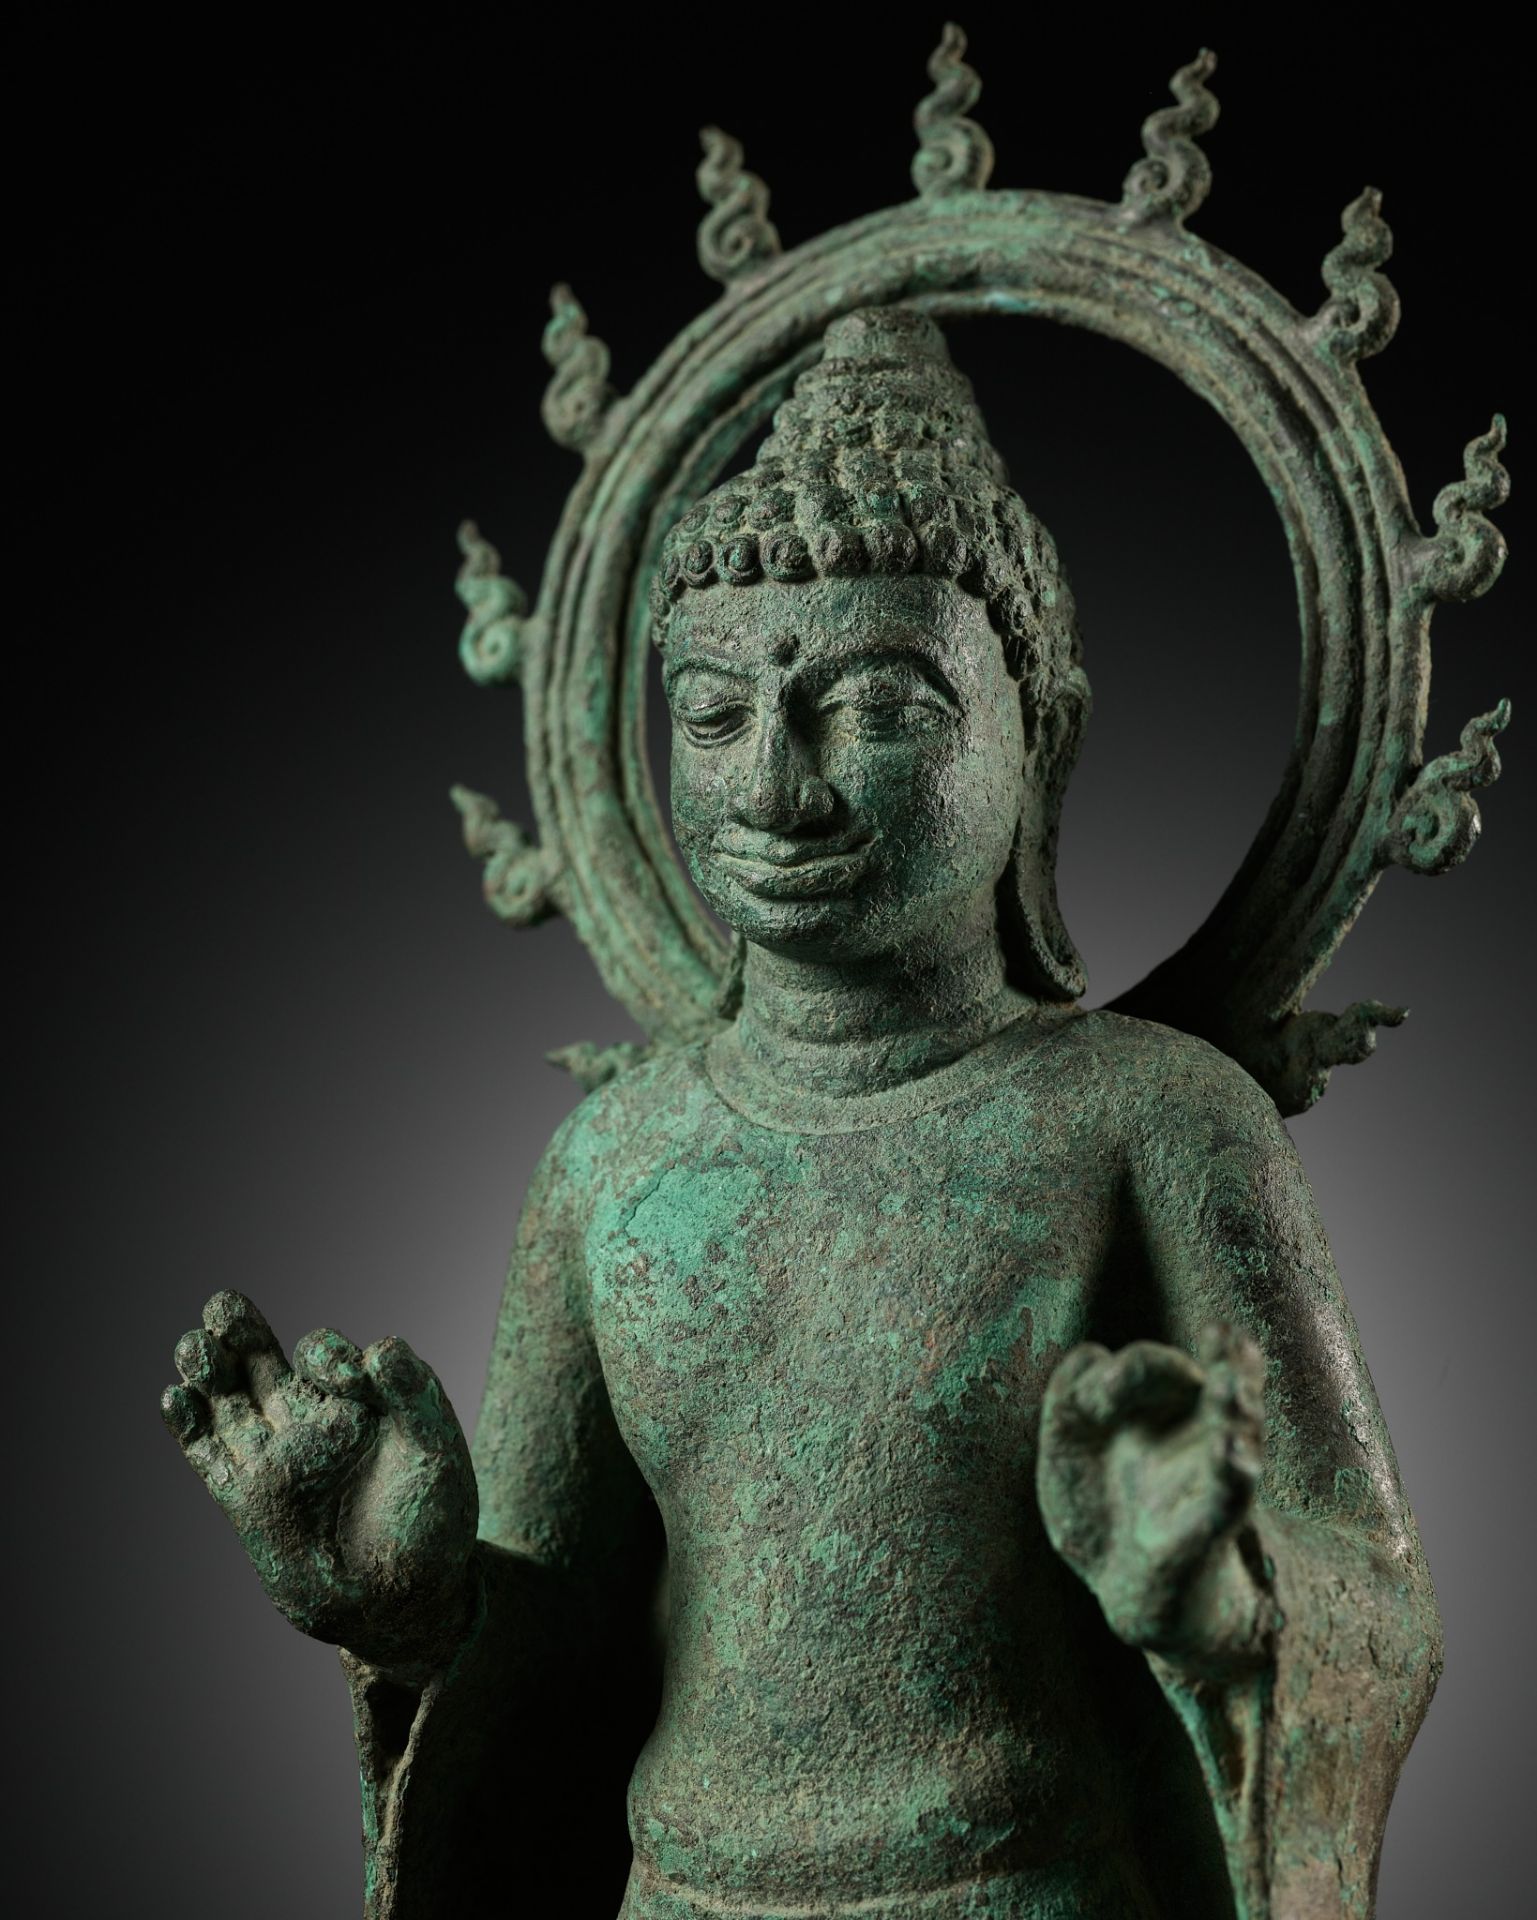 A BRONZE STATUE OF BUDDHA WITHIN A FLAMING AUREOLE, INDONESIA, CENTRAL JAVA, 8TH-9TH CENTURY